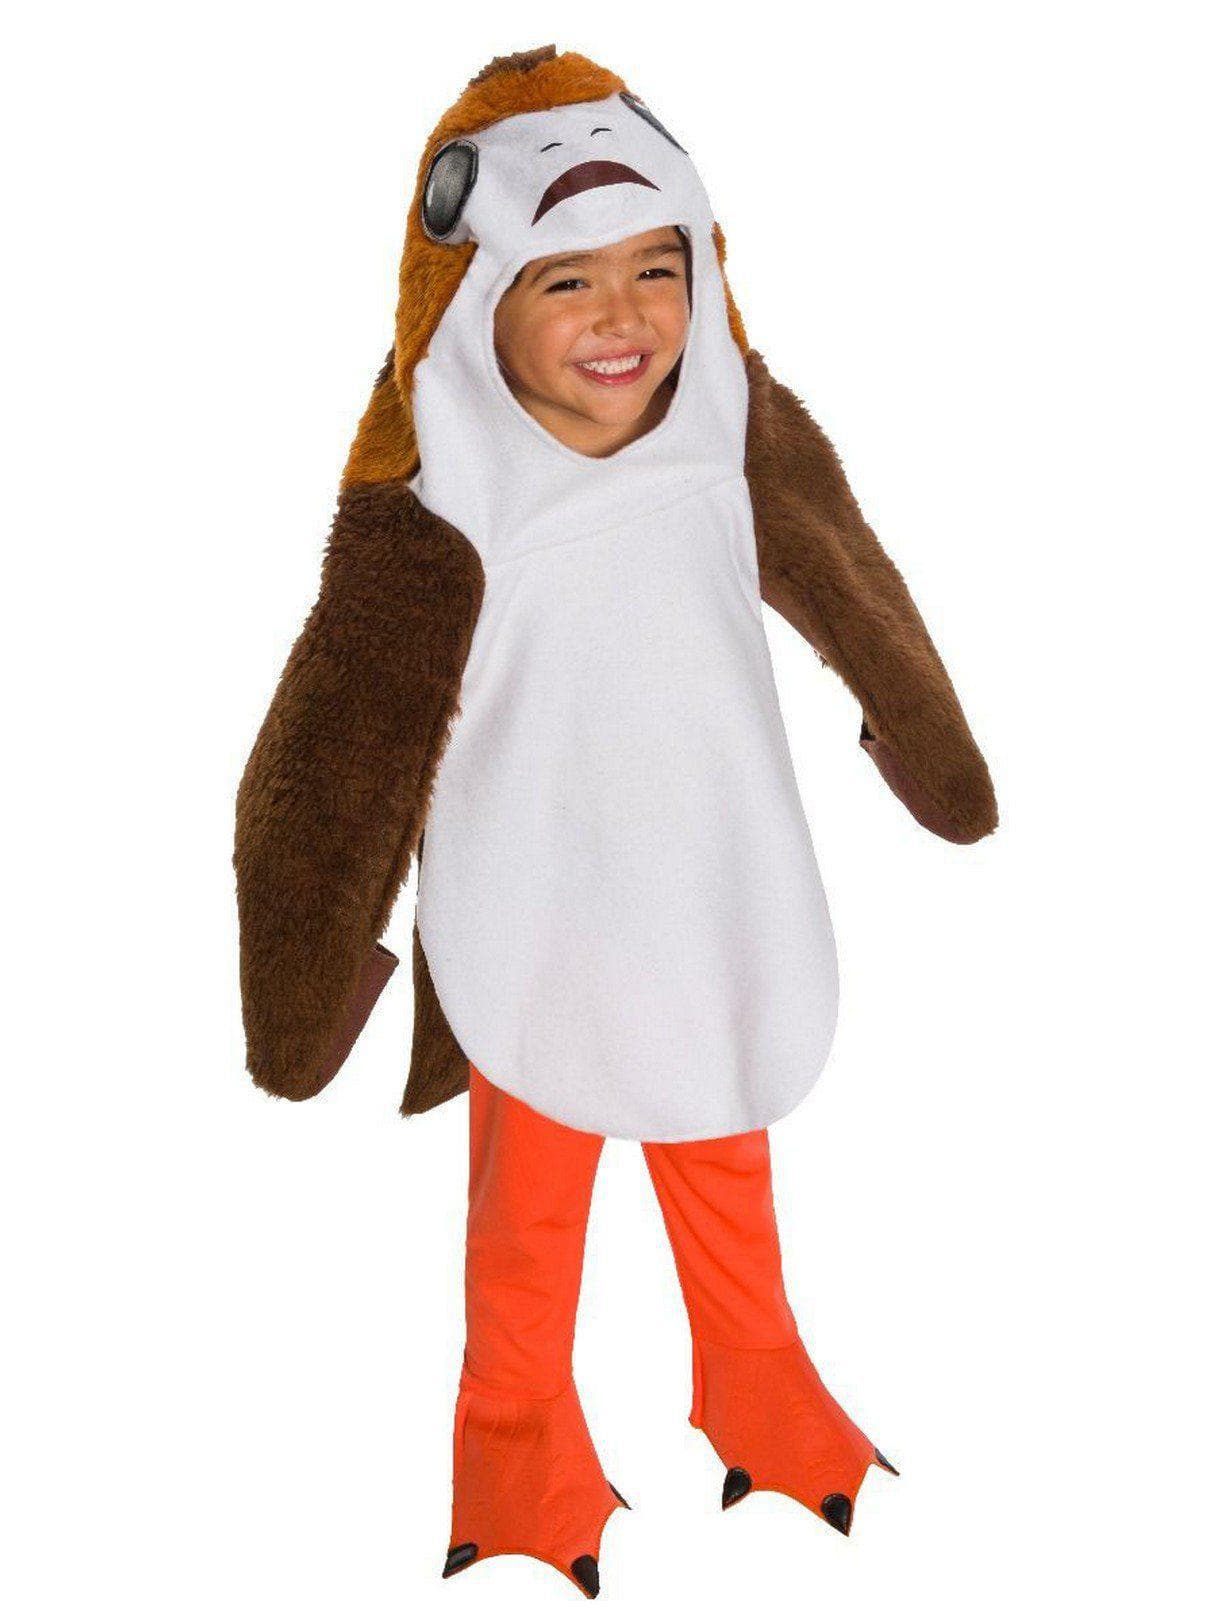 Baby/Toddler The Last Jedi Porg Deluxe Costume - costumes.com